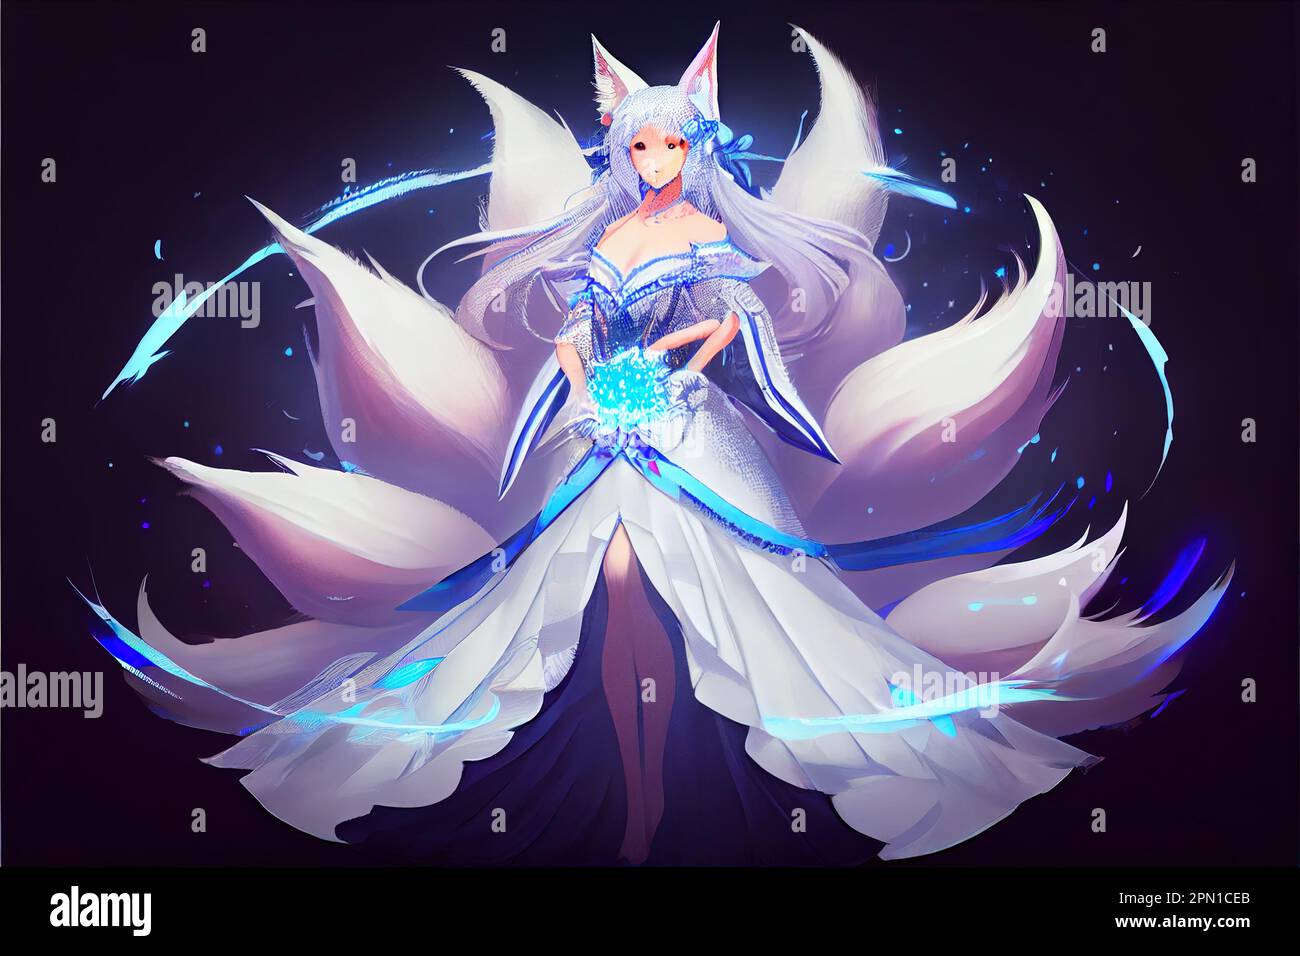 NineTailed Fox Ahri League of Legends game 25 Apr 2019Random Anime  Arts rARTs Collection of anime pictures